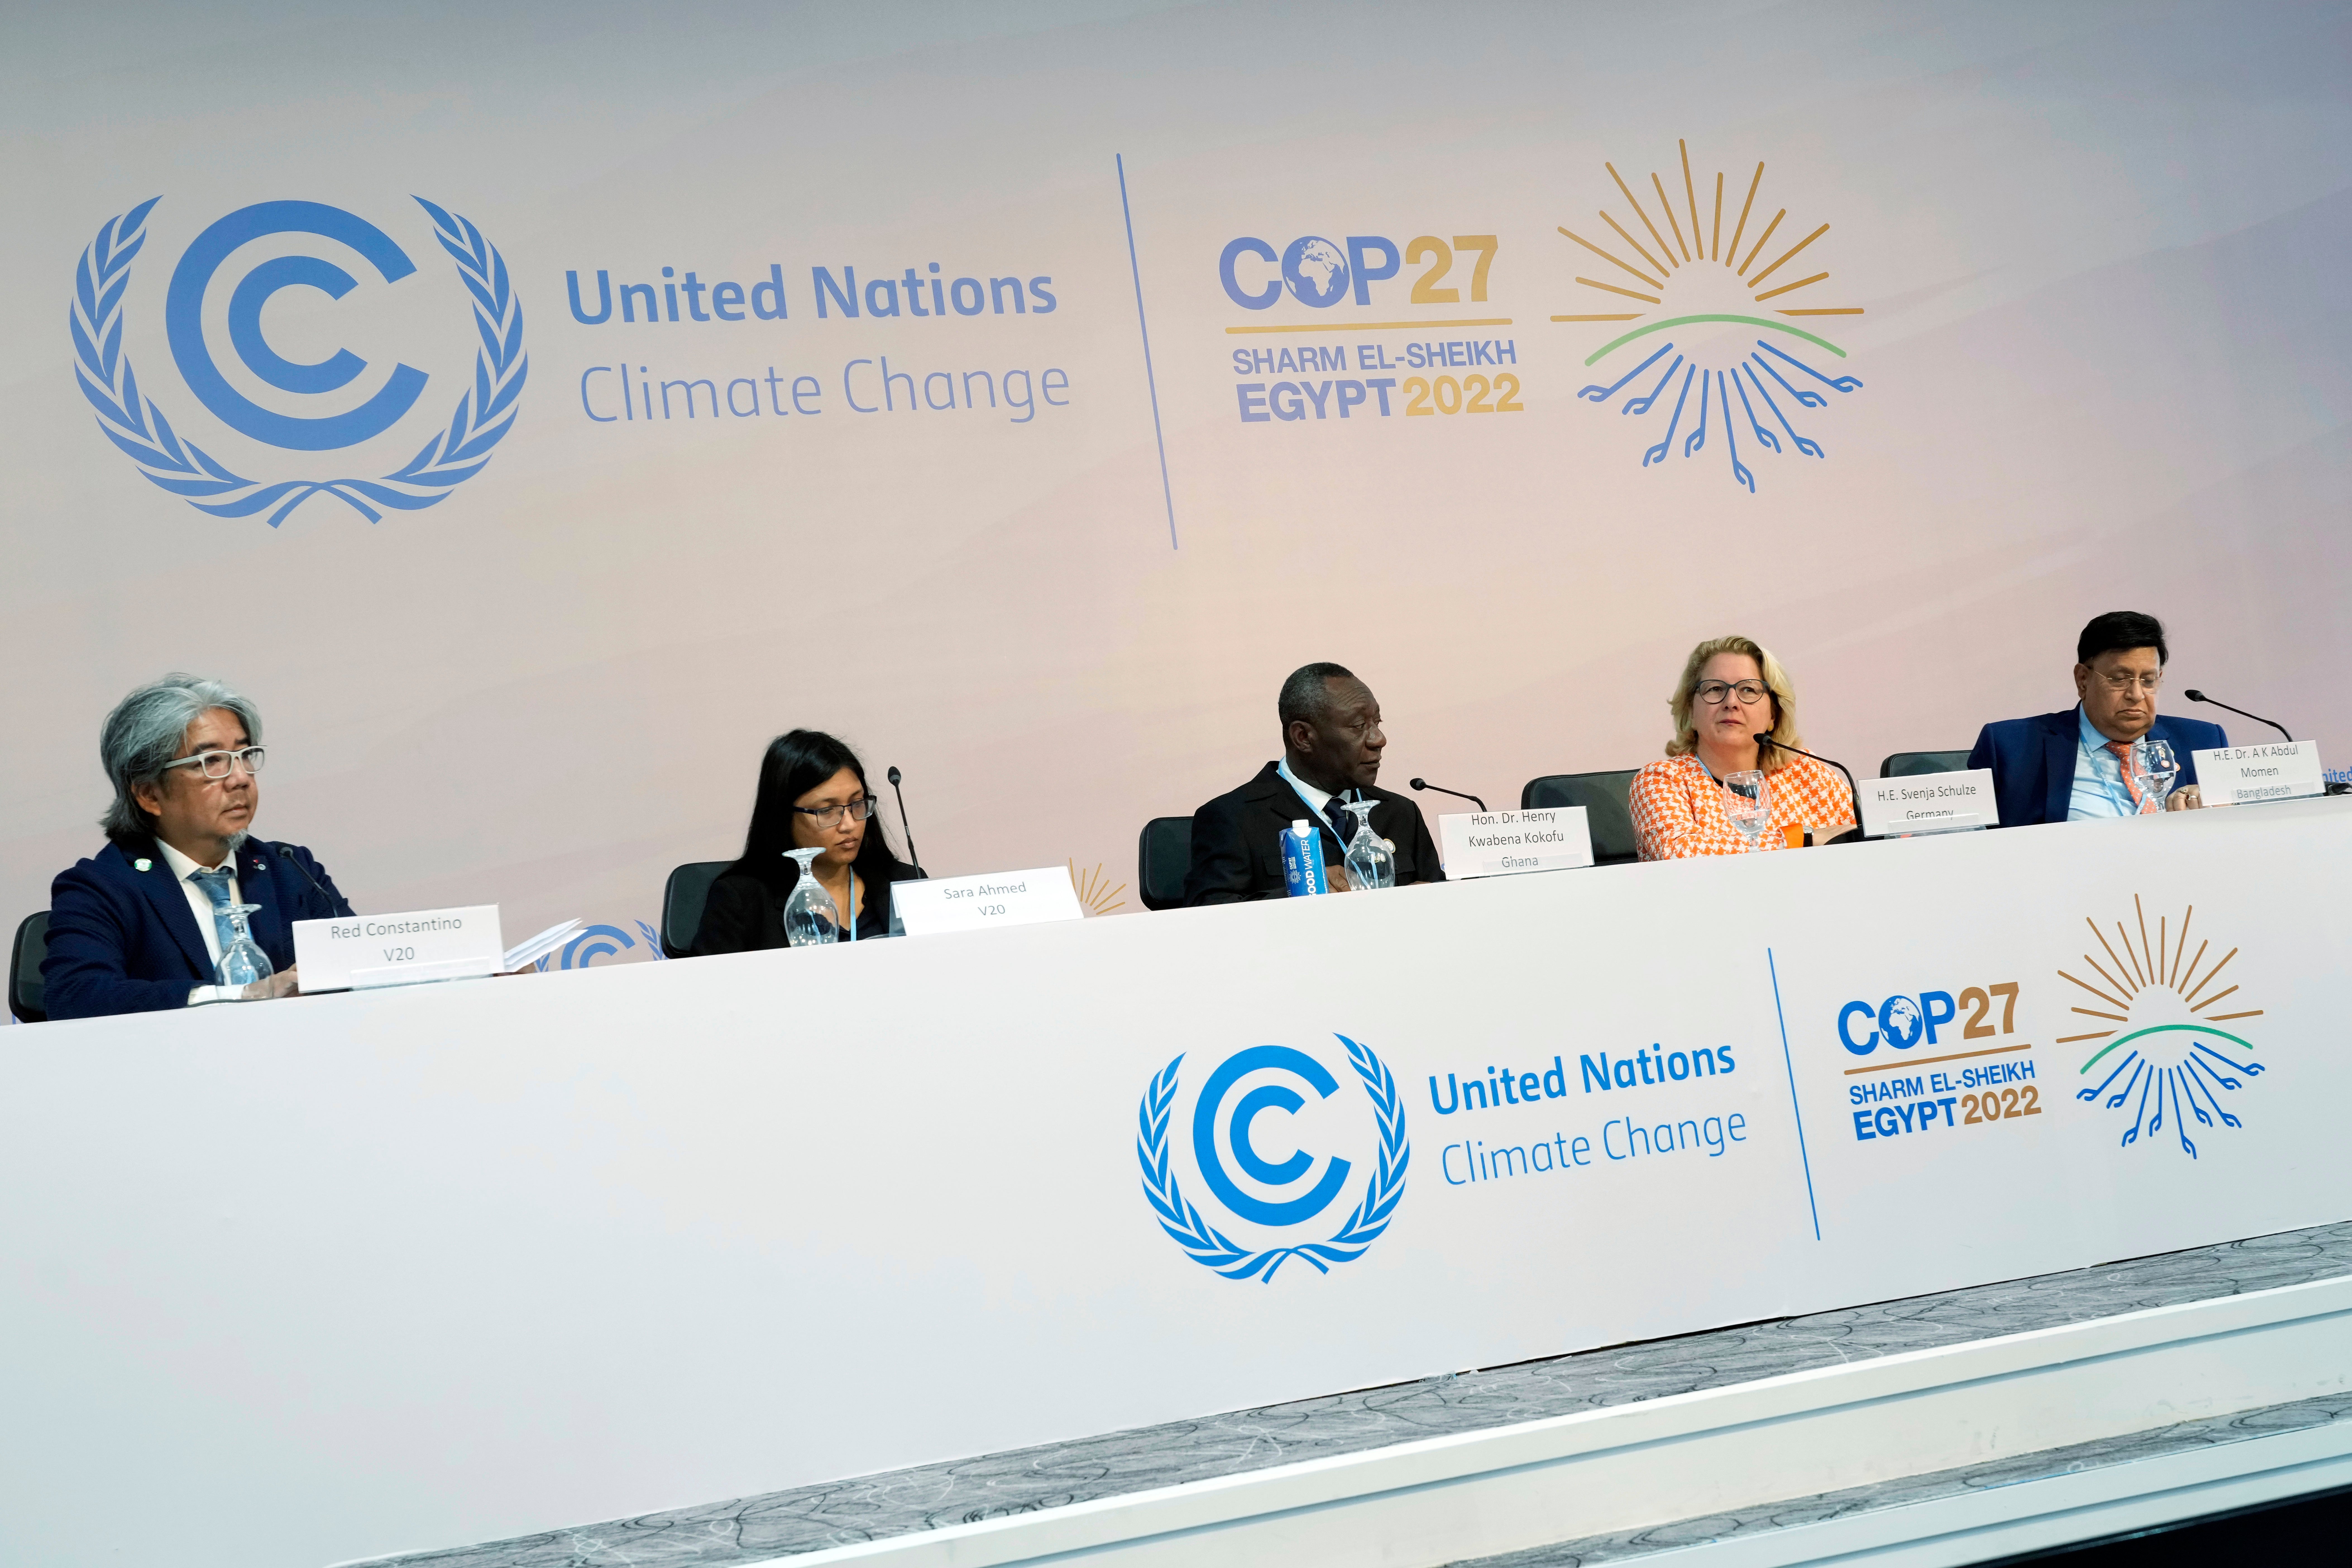 From left, Red Constantino, of V20, Sara Ahmed, of V20, Henry Kwabena Kokofu, of Ghana, Svenja Schulze, of Germany, A K Abdul Momen, of Bangladesh at the Cop27 UN Climate Summit, on Monday